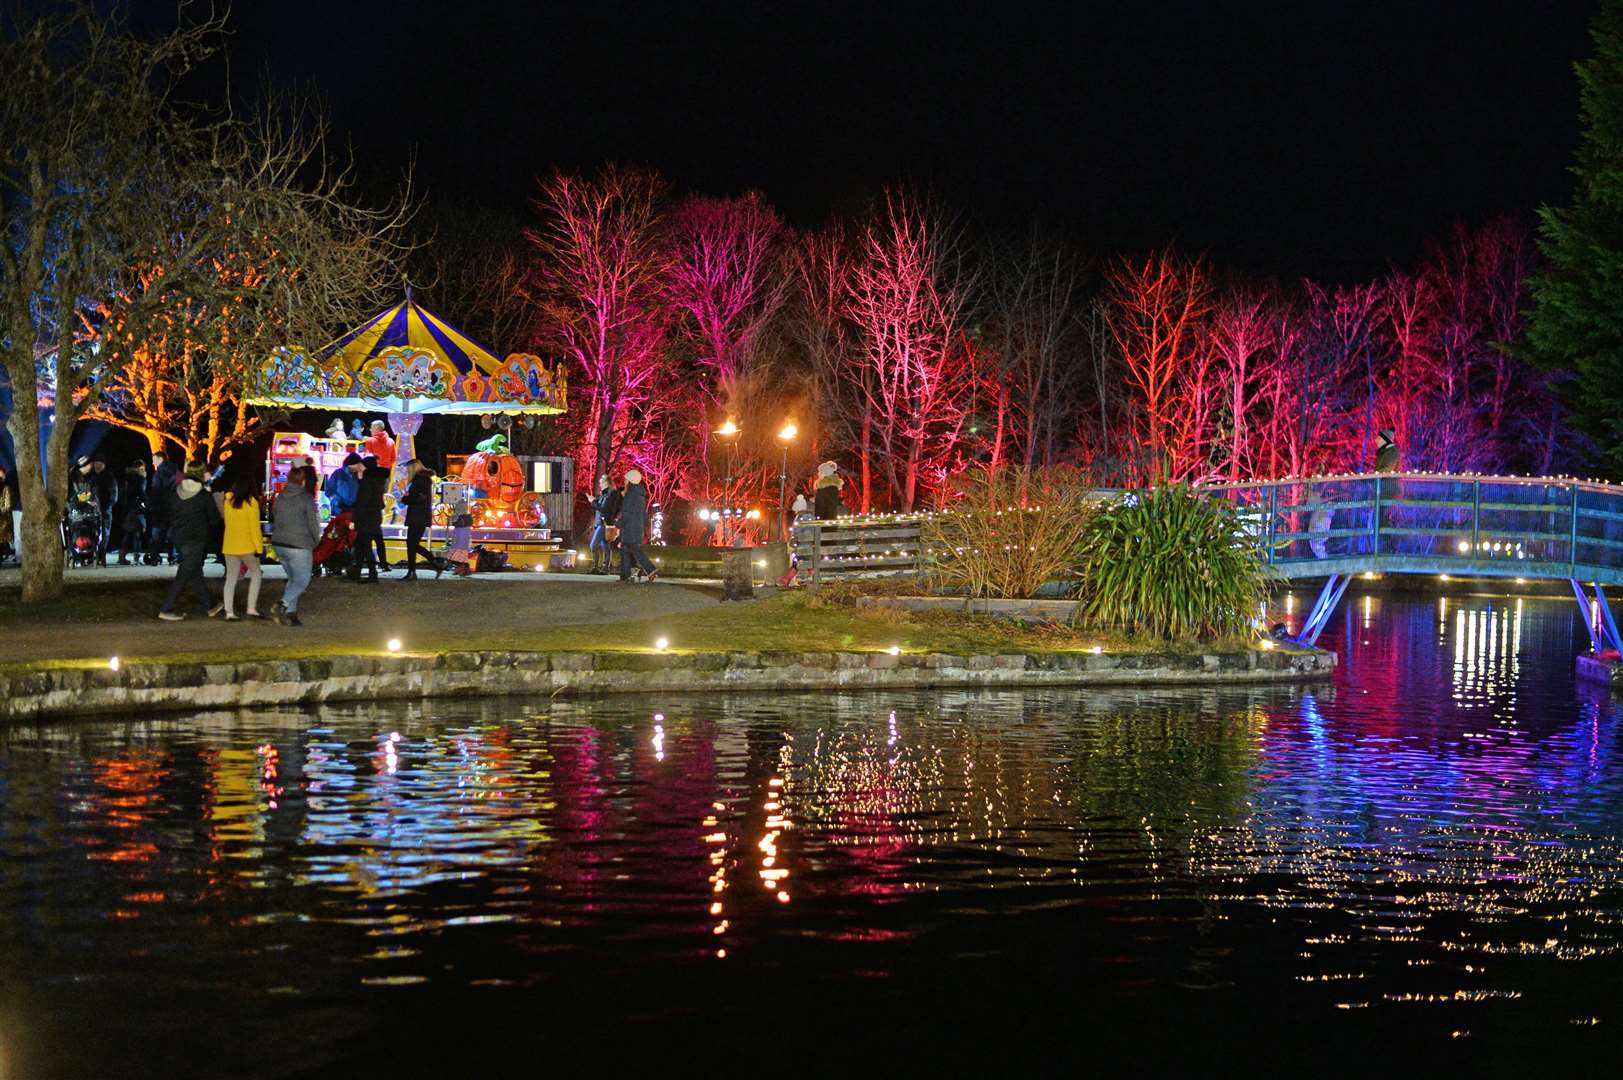 The Winter Wonderland event traditionally sees Whin Park transformed.